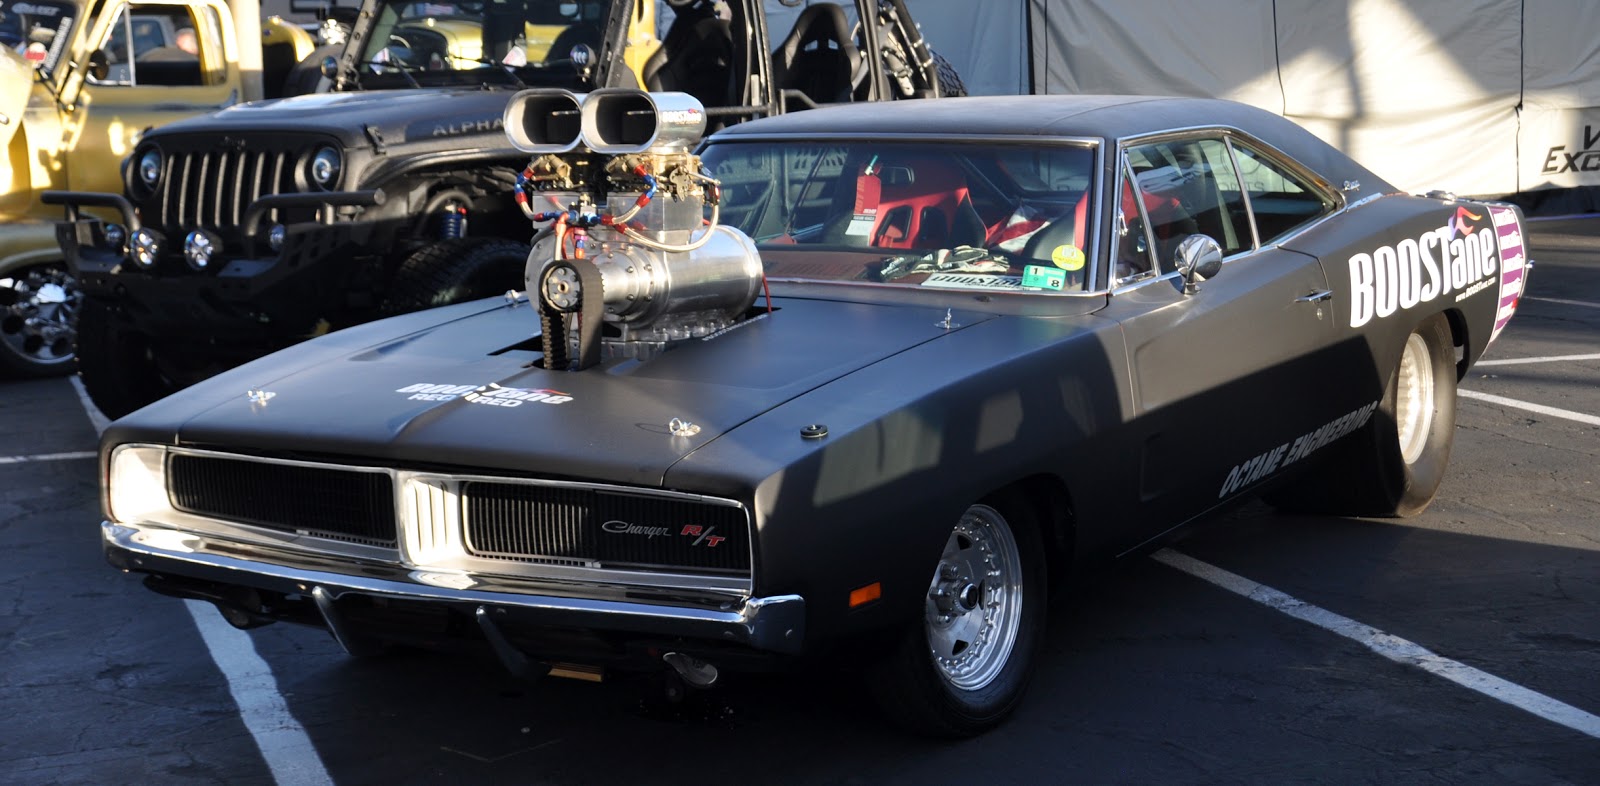 Boostane put one crazy big ass blower on their 1969 Charger.